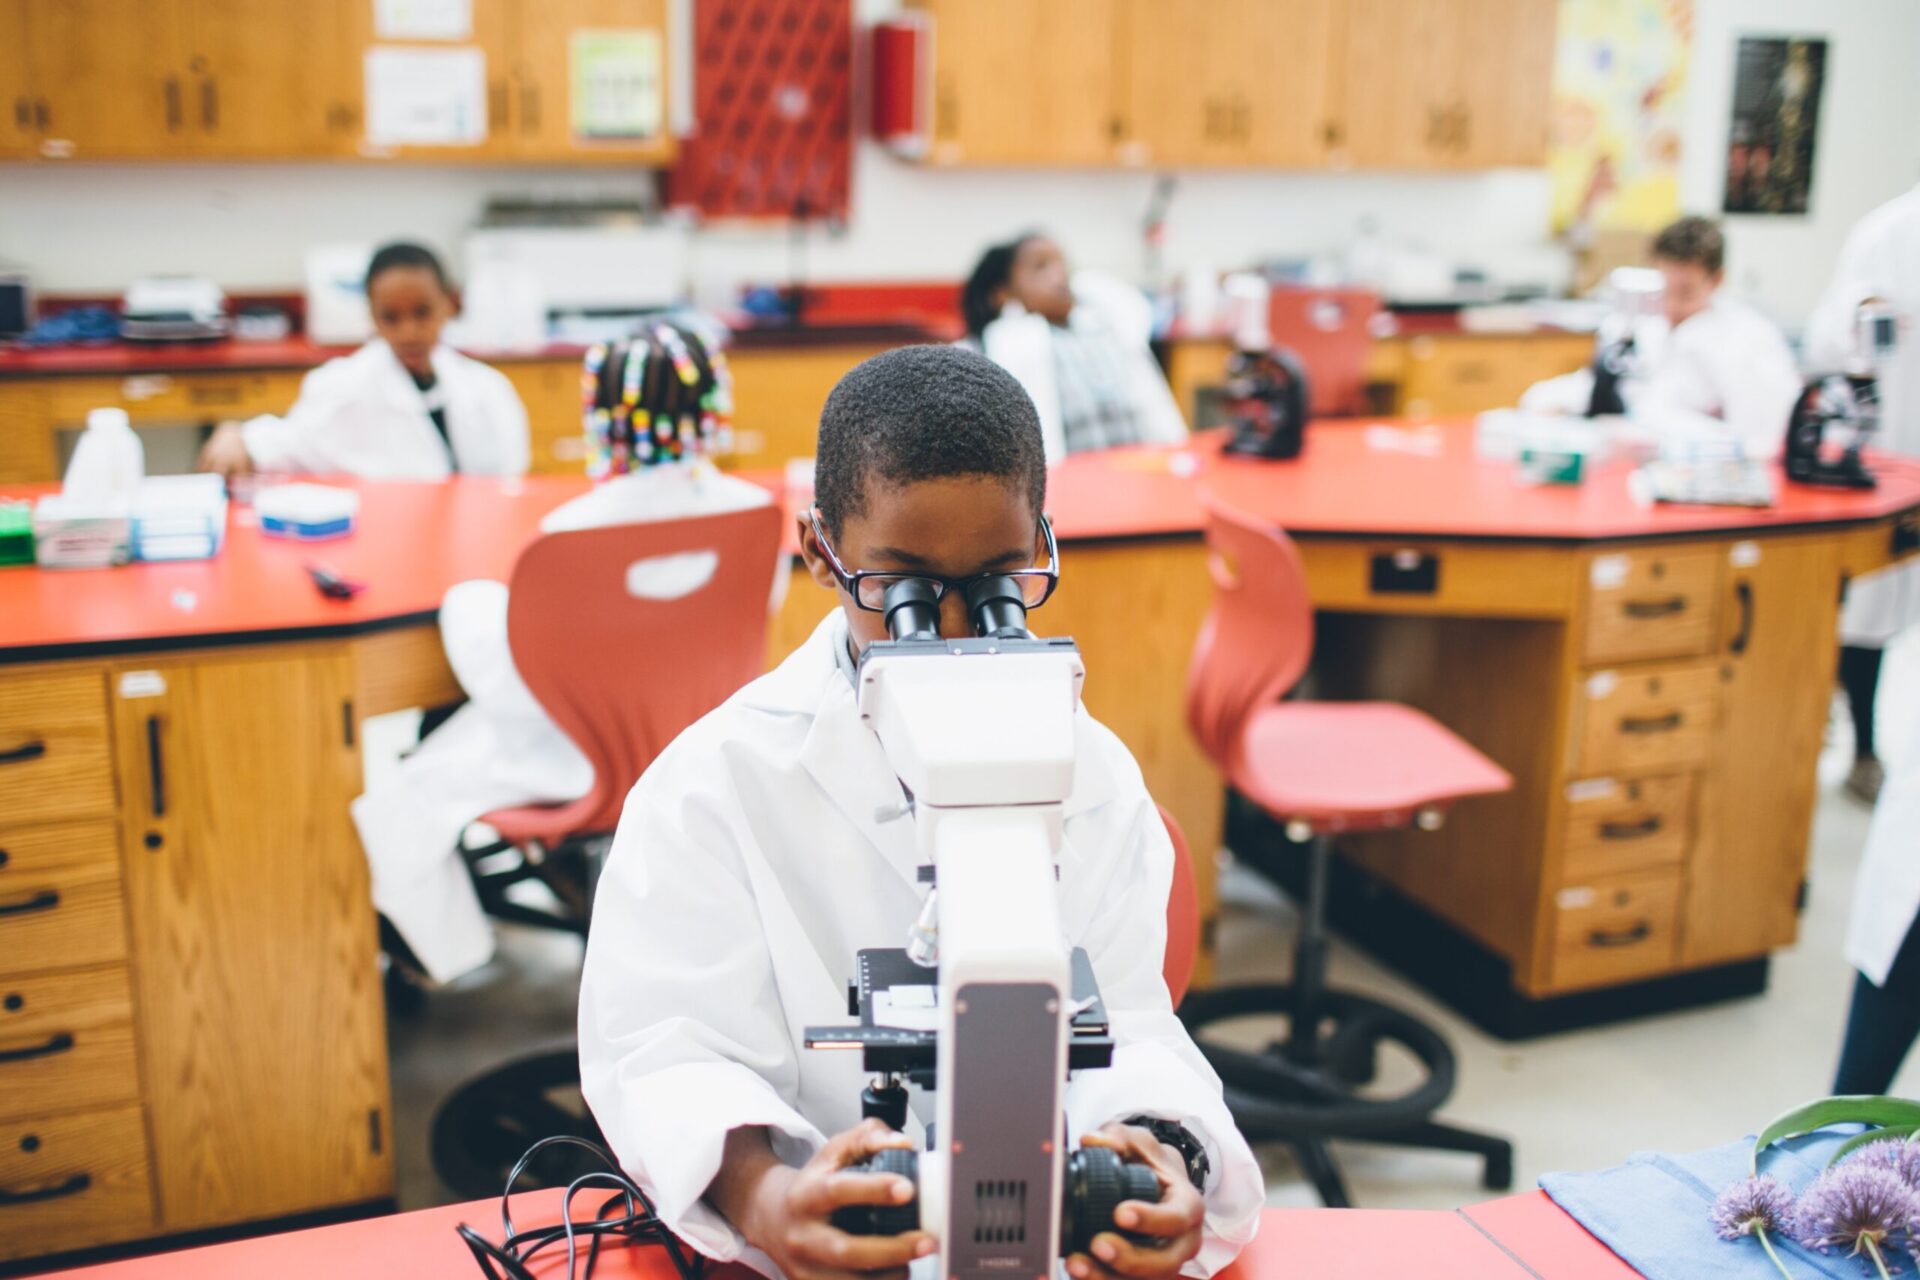 A young Black student works behind a microscope.